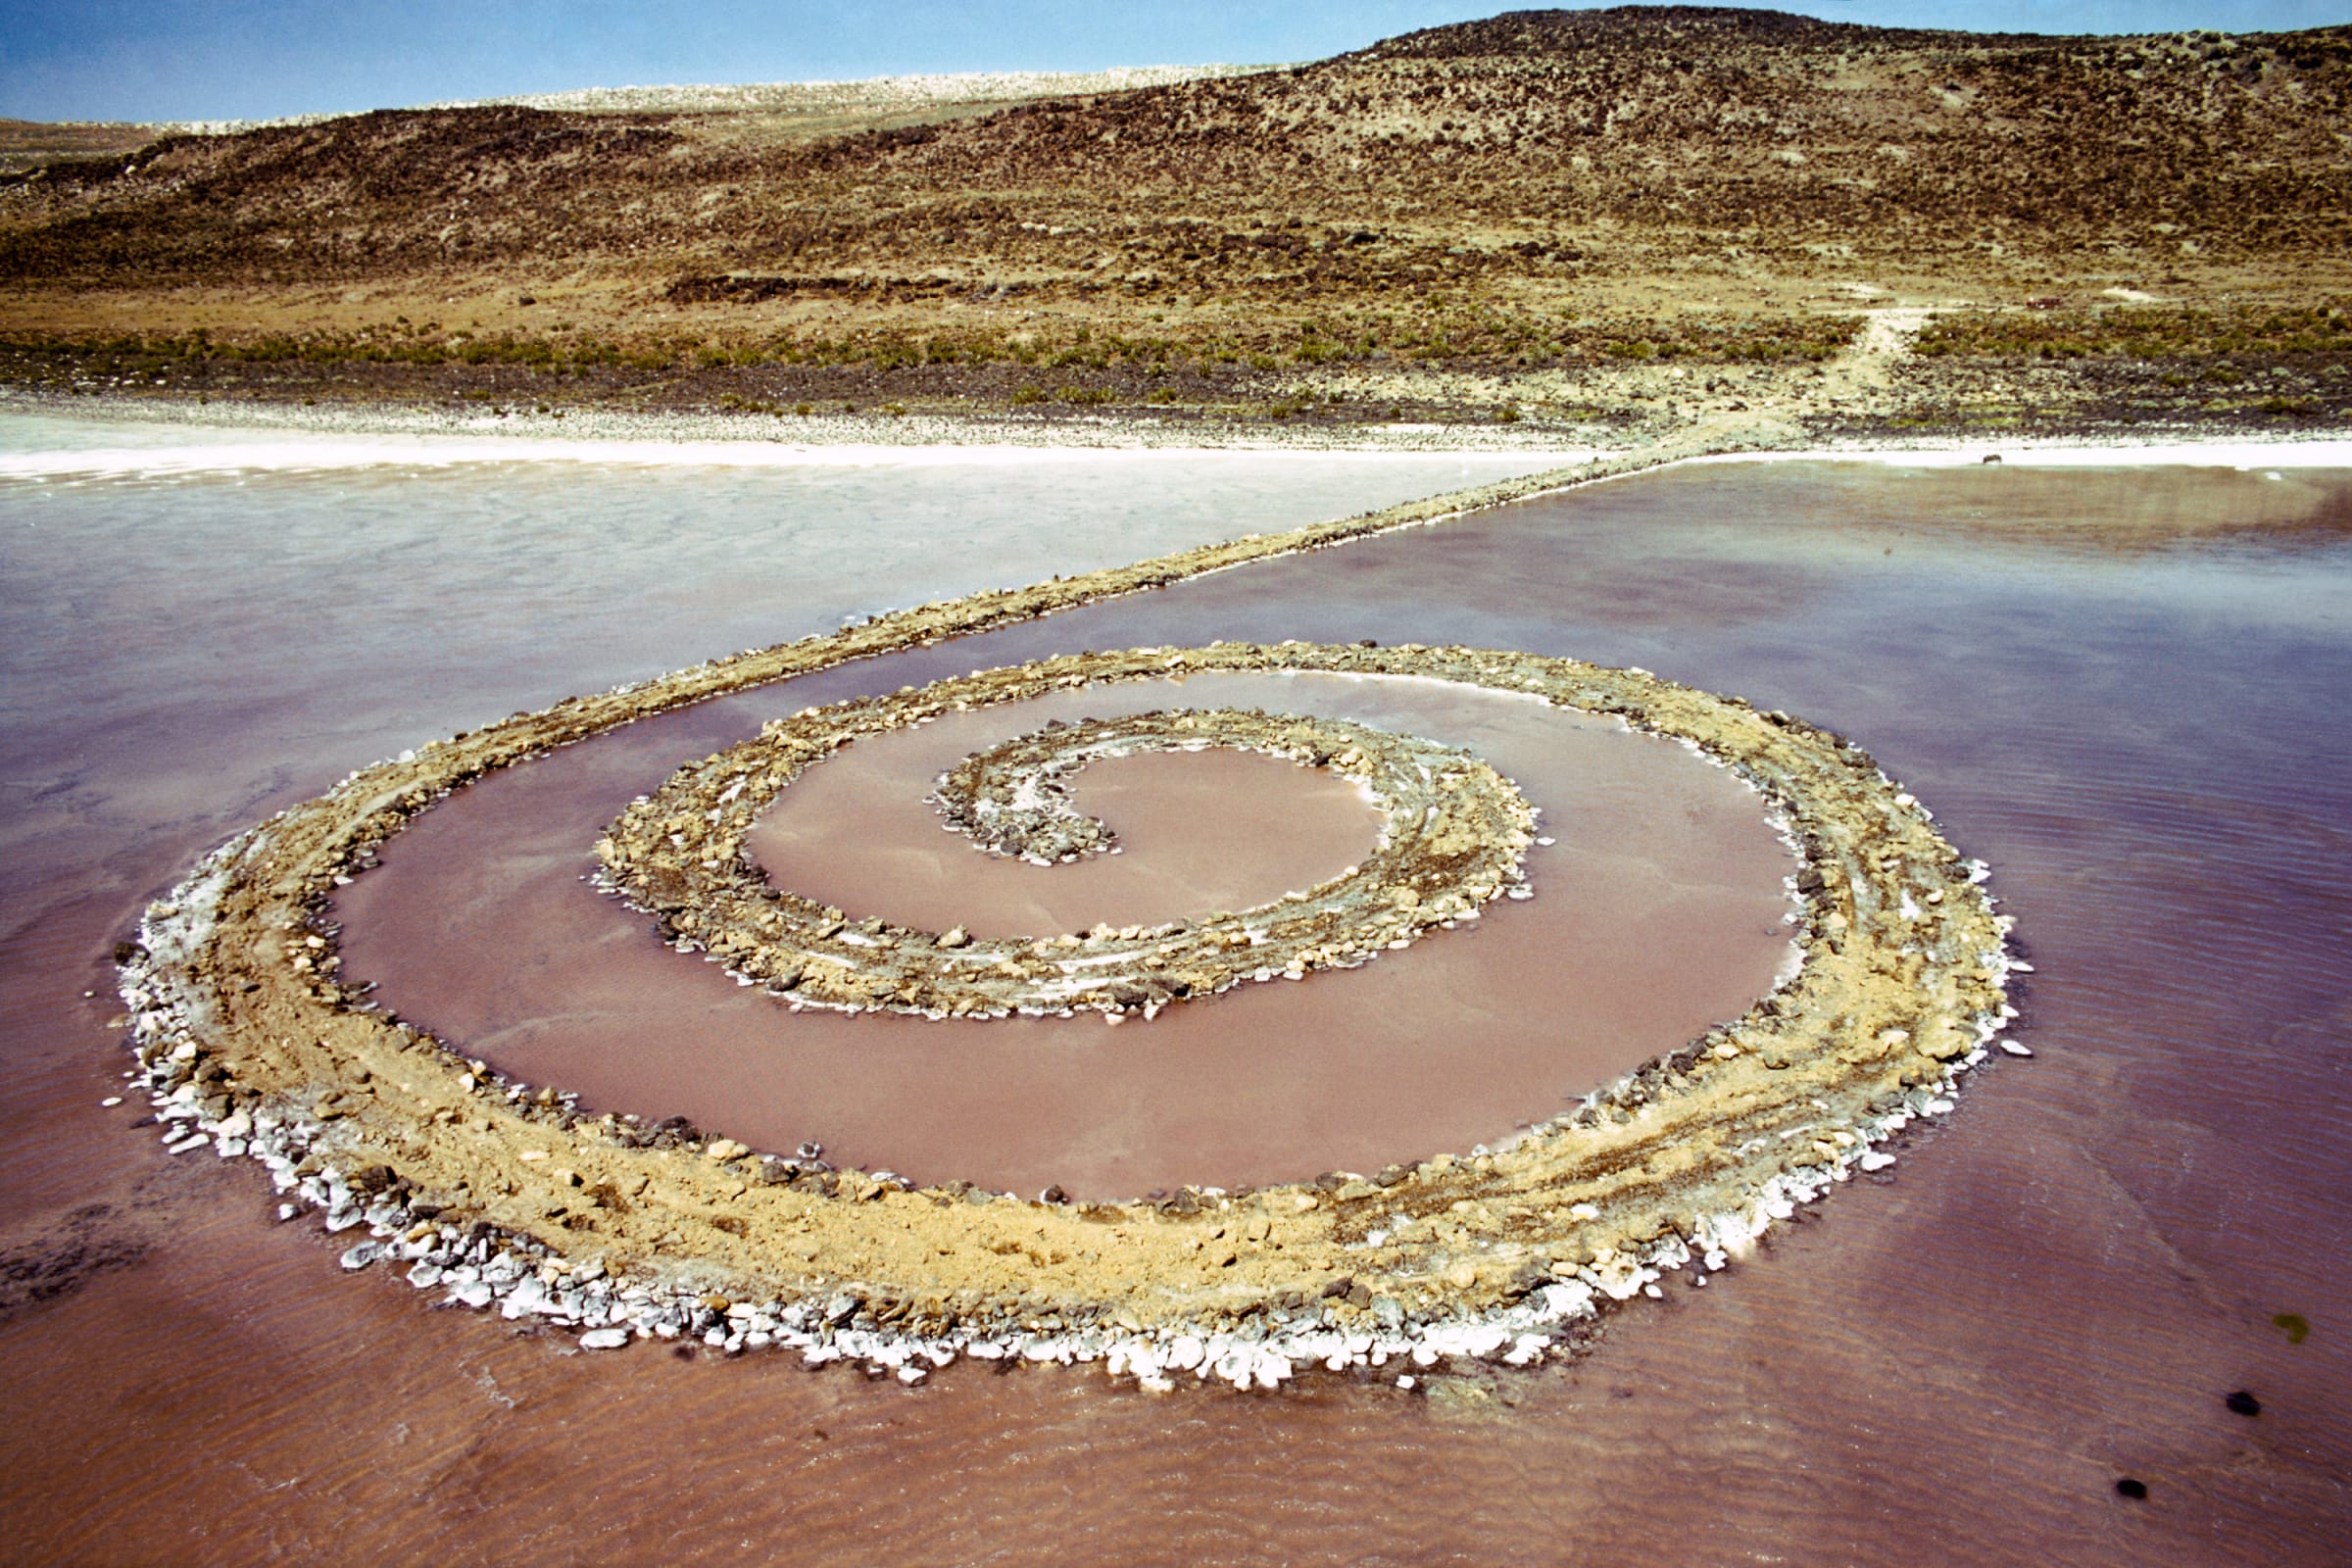 An earthwork by Robert Smithson, containing basalt rocks, salt crystals, earth, and water